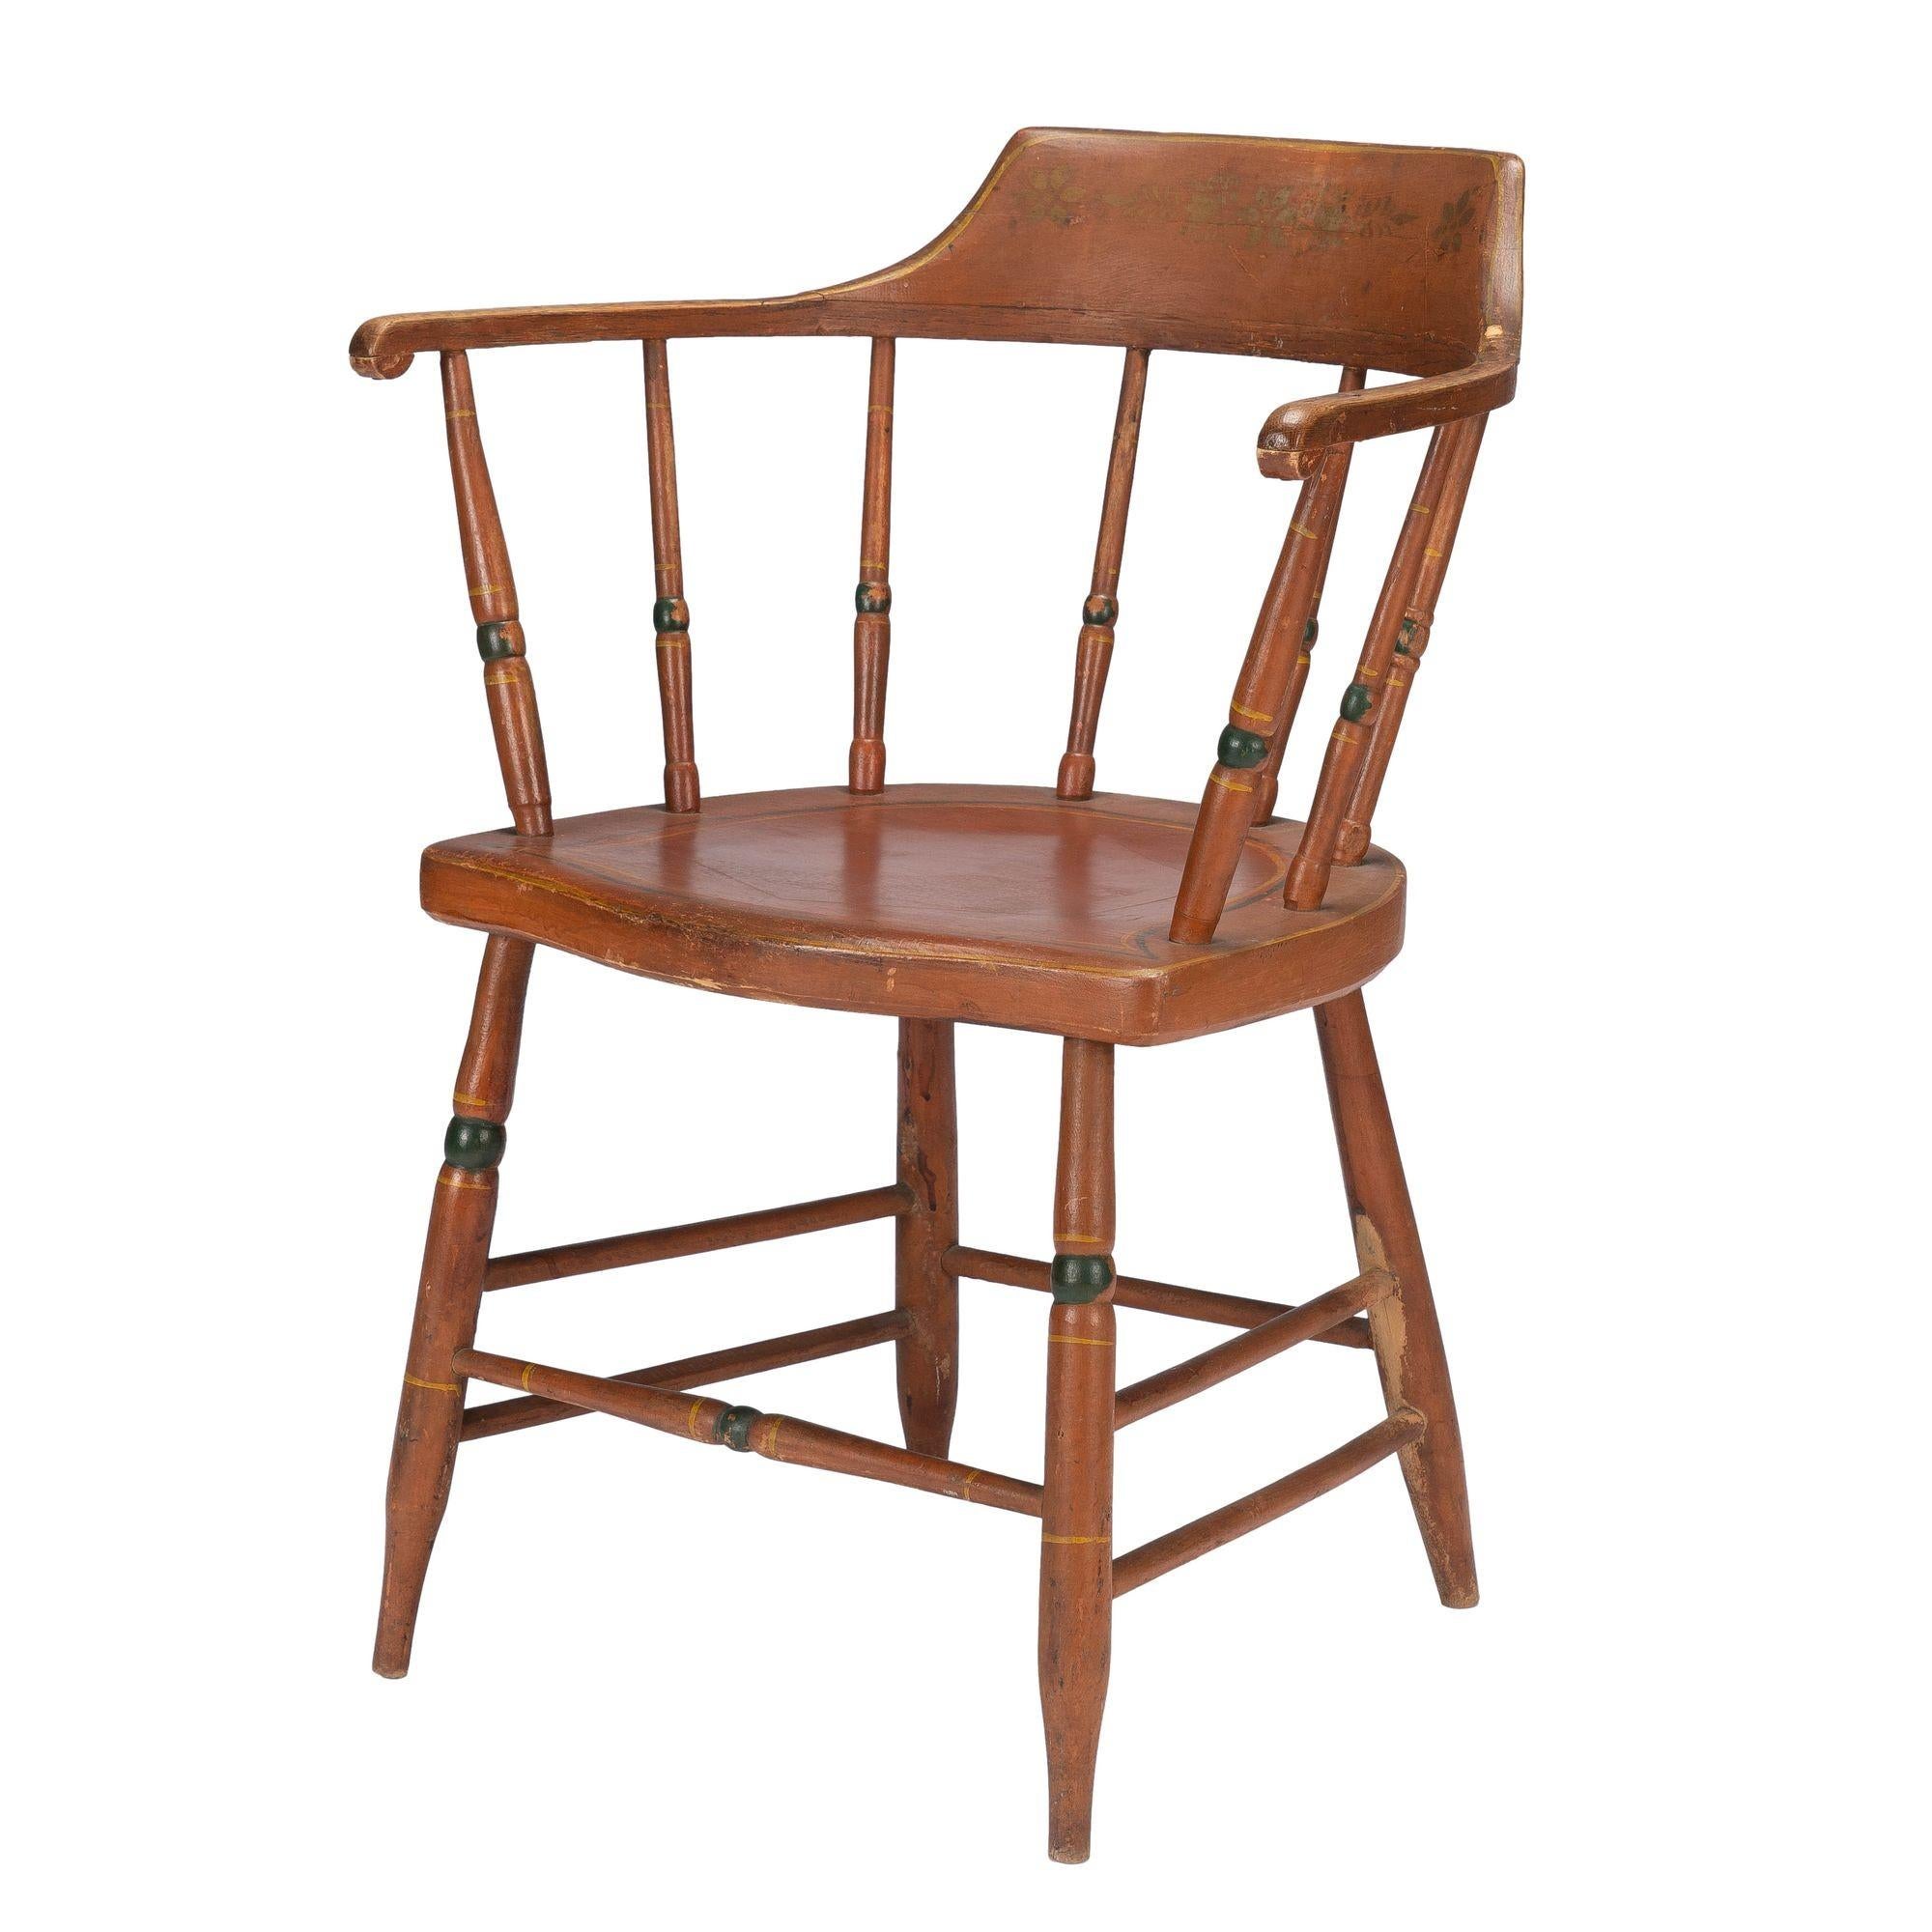 American Sheraton Windsor fancy chair in original oxide red painted finish with accent bands of green. There is a hexagonal inset design on top of the seat and a circular inset underneath. Comfortably scaled with a lovely patina.
American, circa